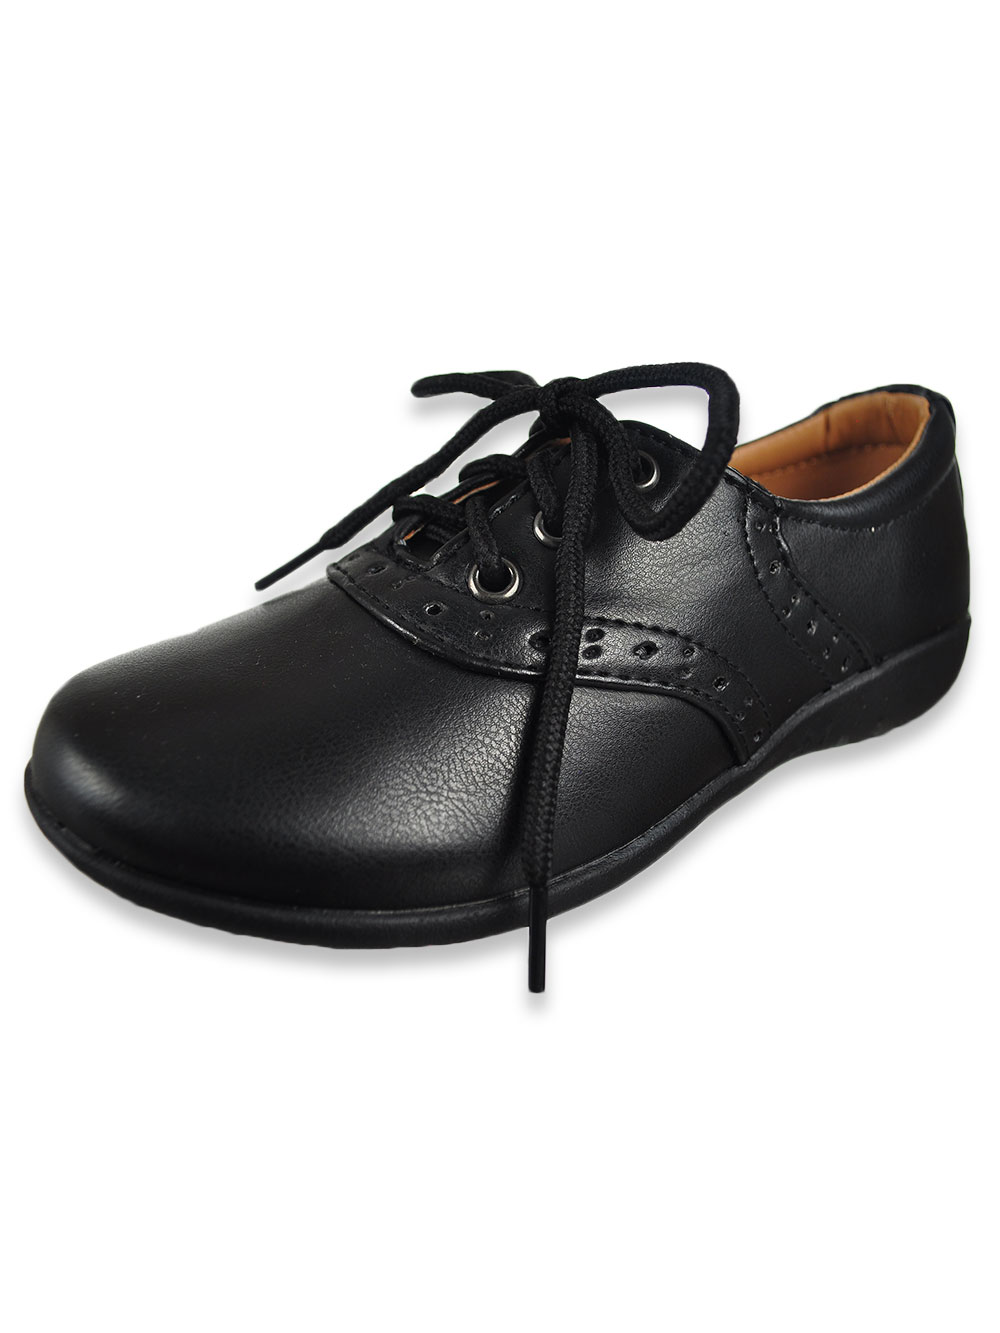 Girls' Lace-Up School Shoes